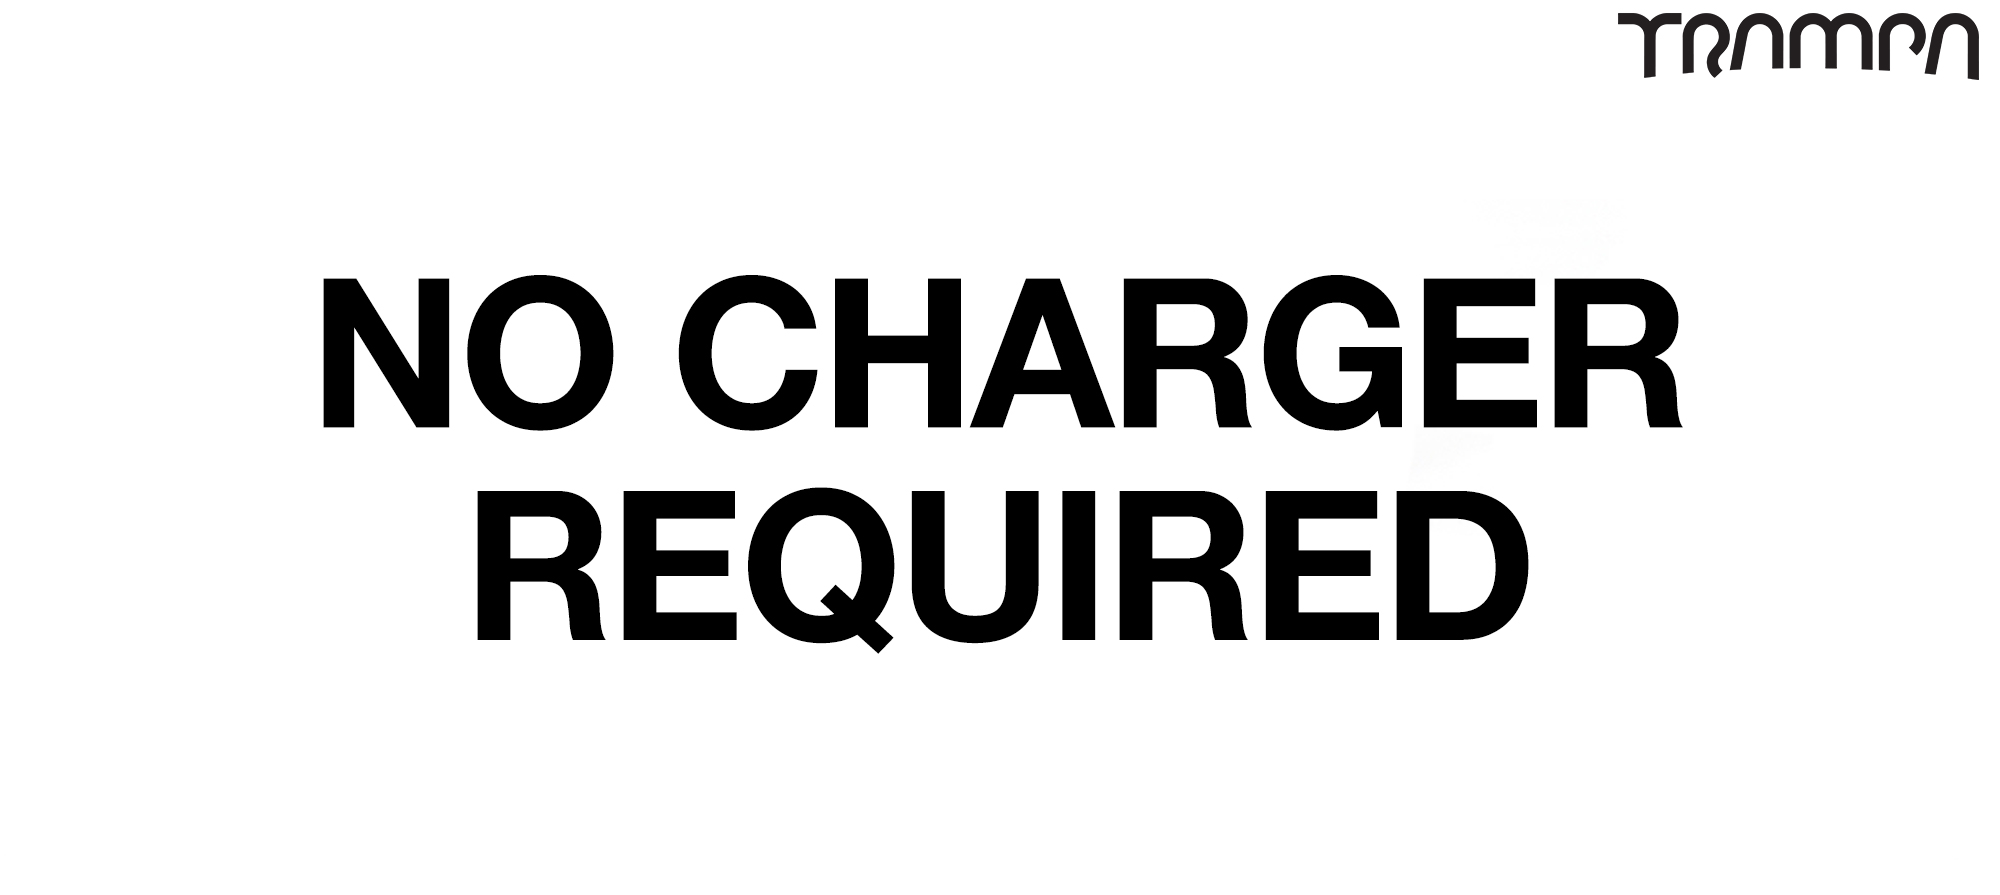 No Charger required thanks (-£60)